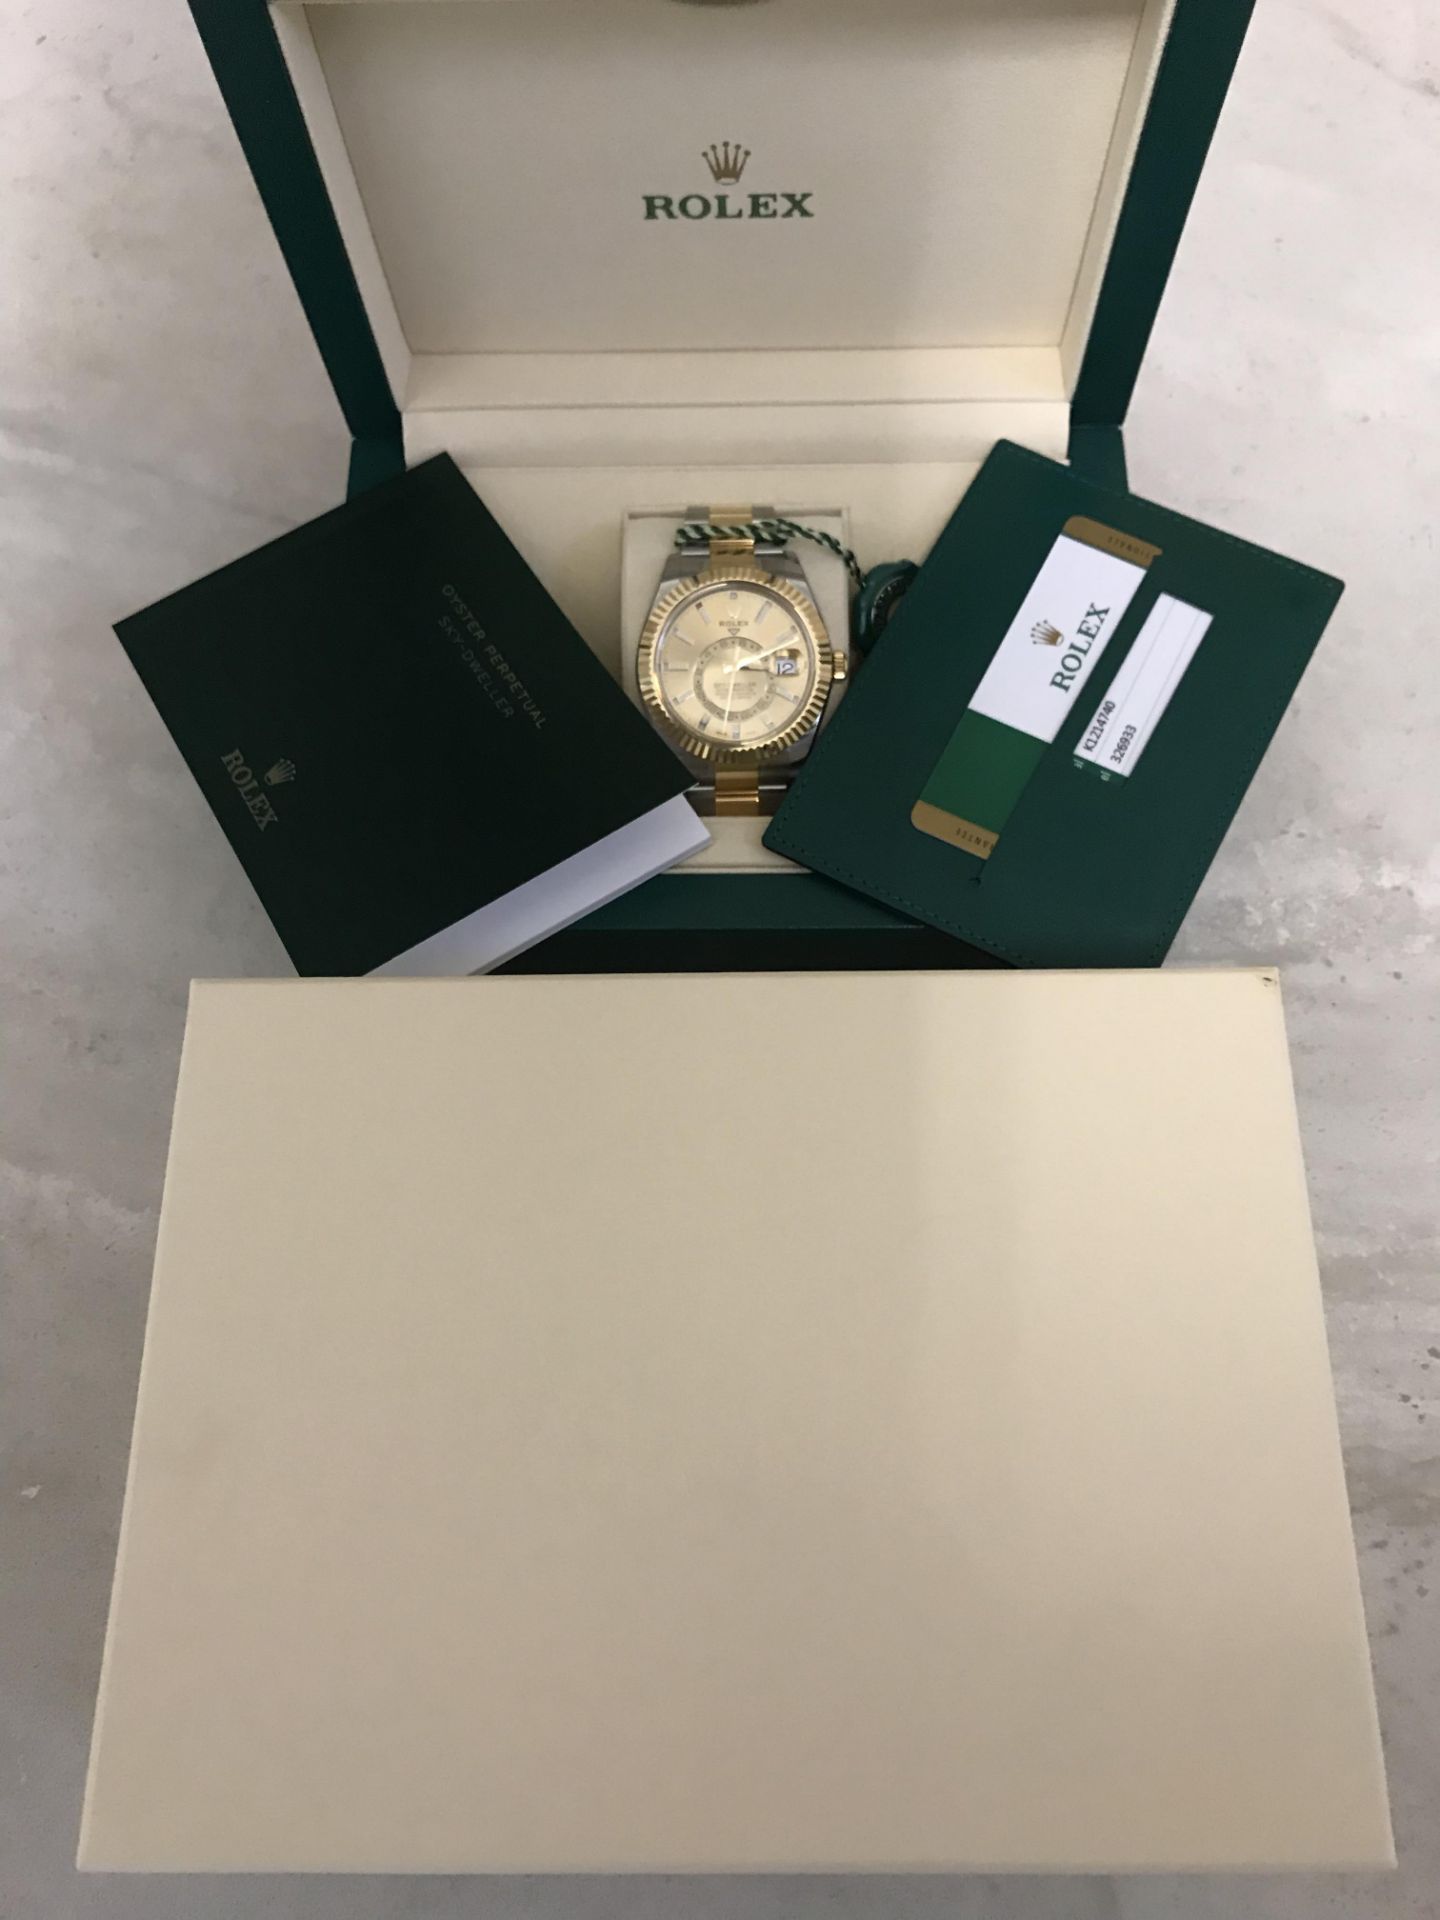 2018 ROLEX SKY-DWELLER OYSTER 42MM, OYSTER STEEL AND YELLOW GOLD **BRAND NEW** 10% BUYERS PREMIUM - Image 2 of 12